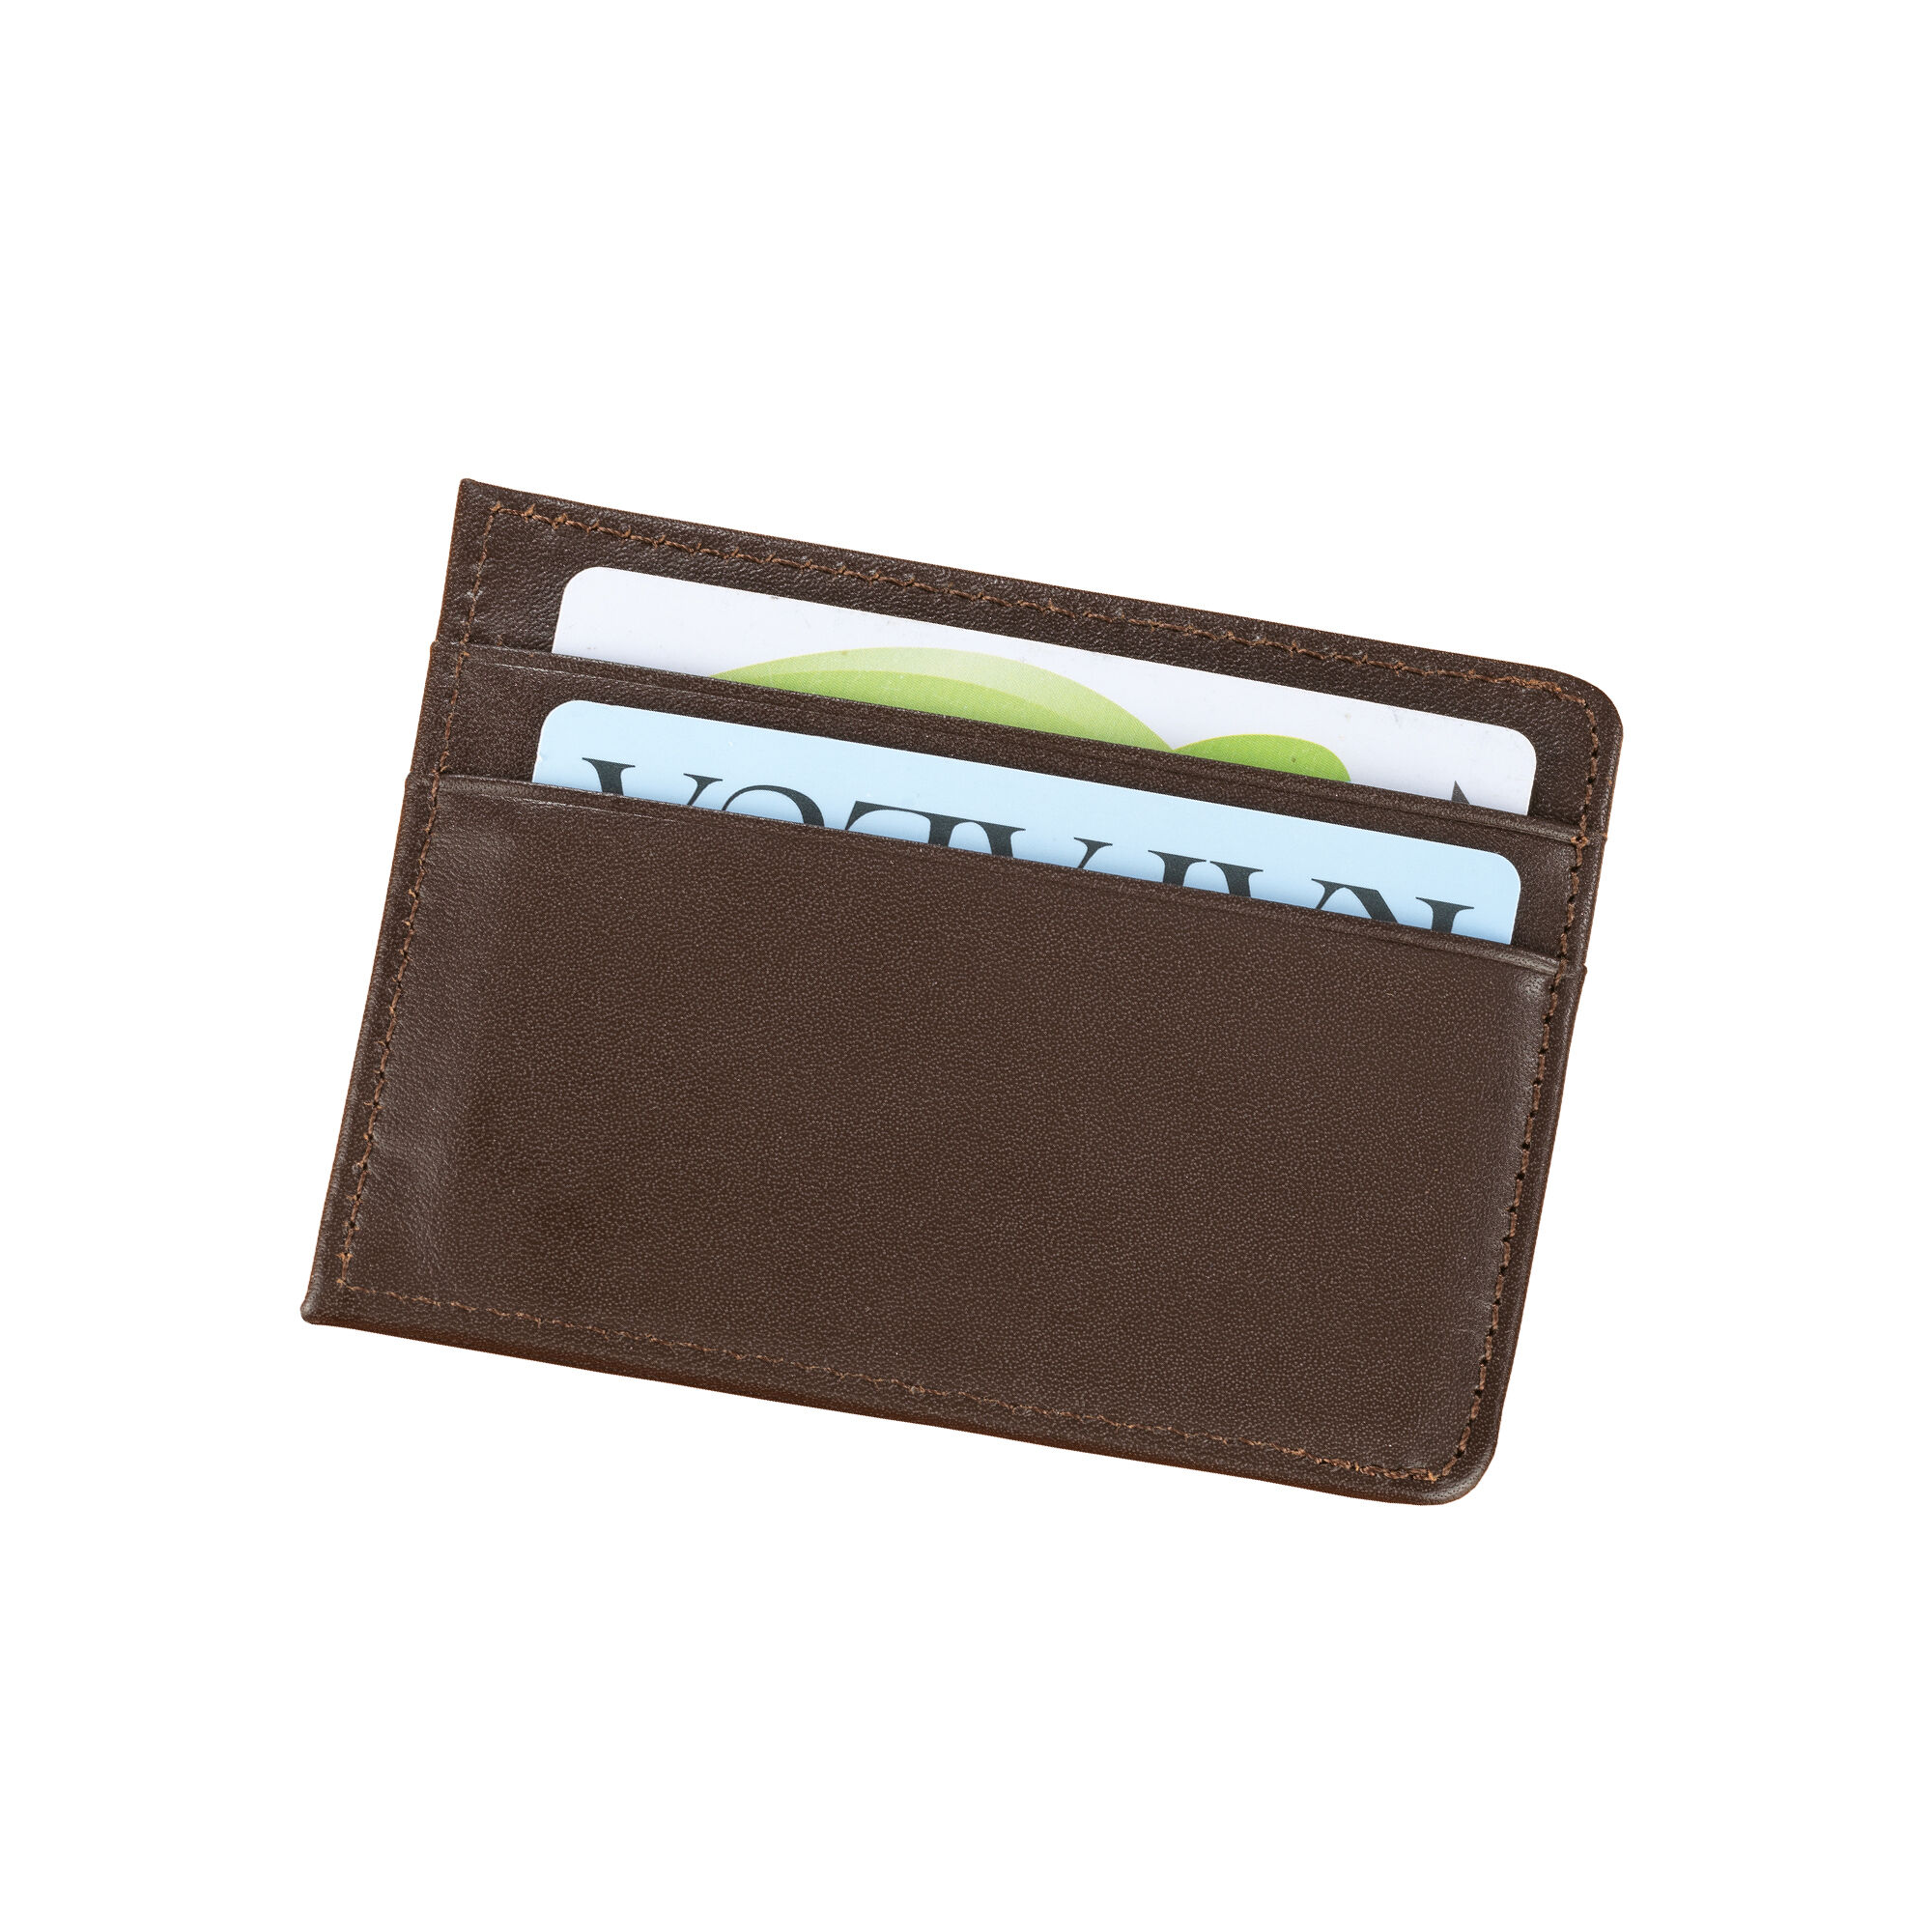 Birth Year Coin Wallet 11113 0019 c card pouch